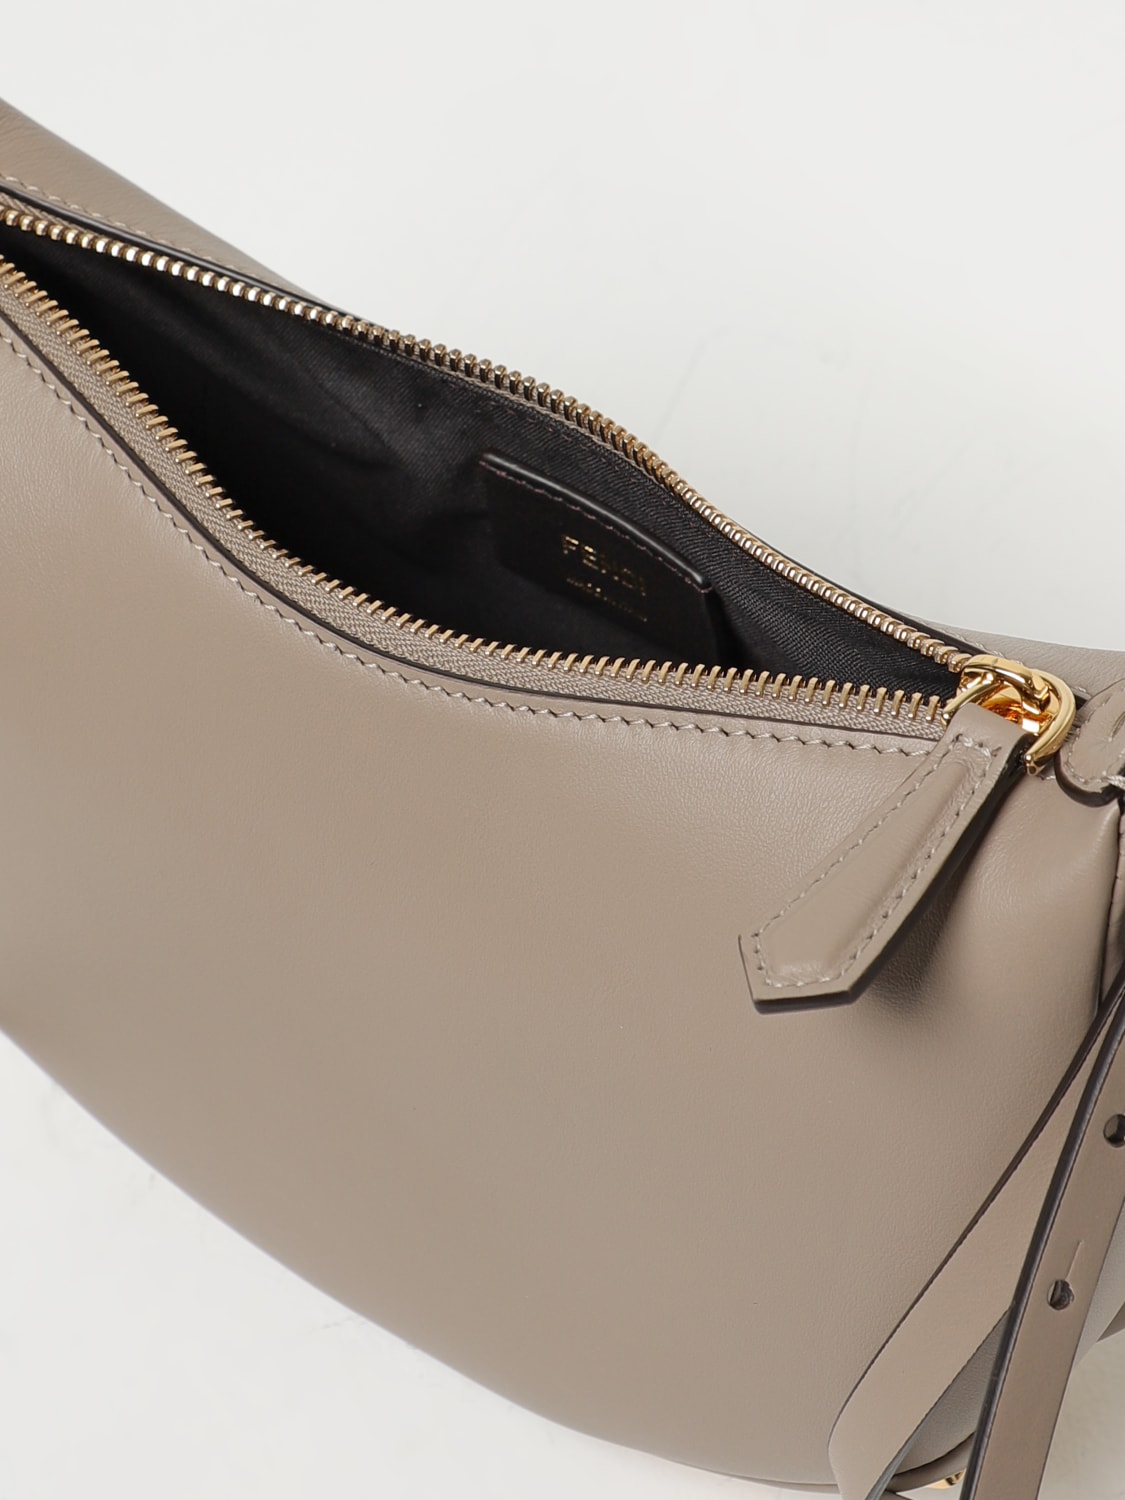 Fendi First Small - Dove grey leather bag